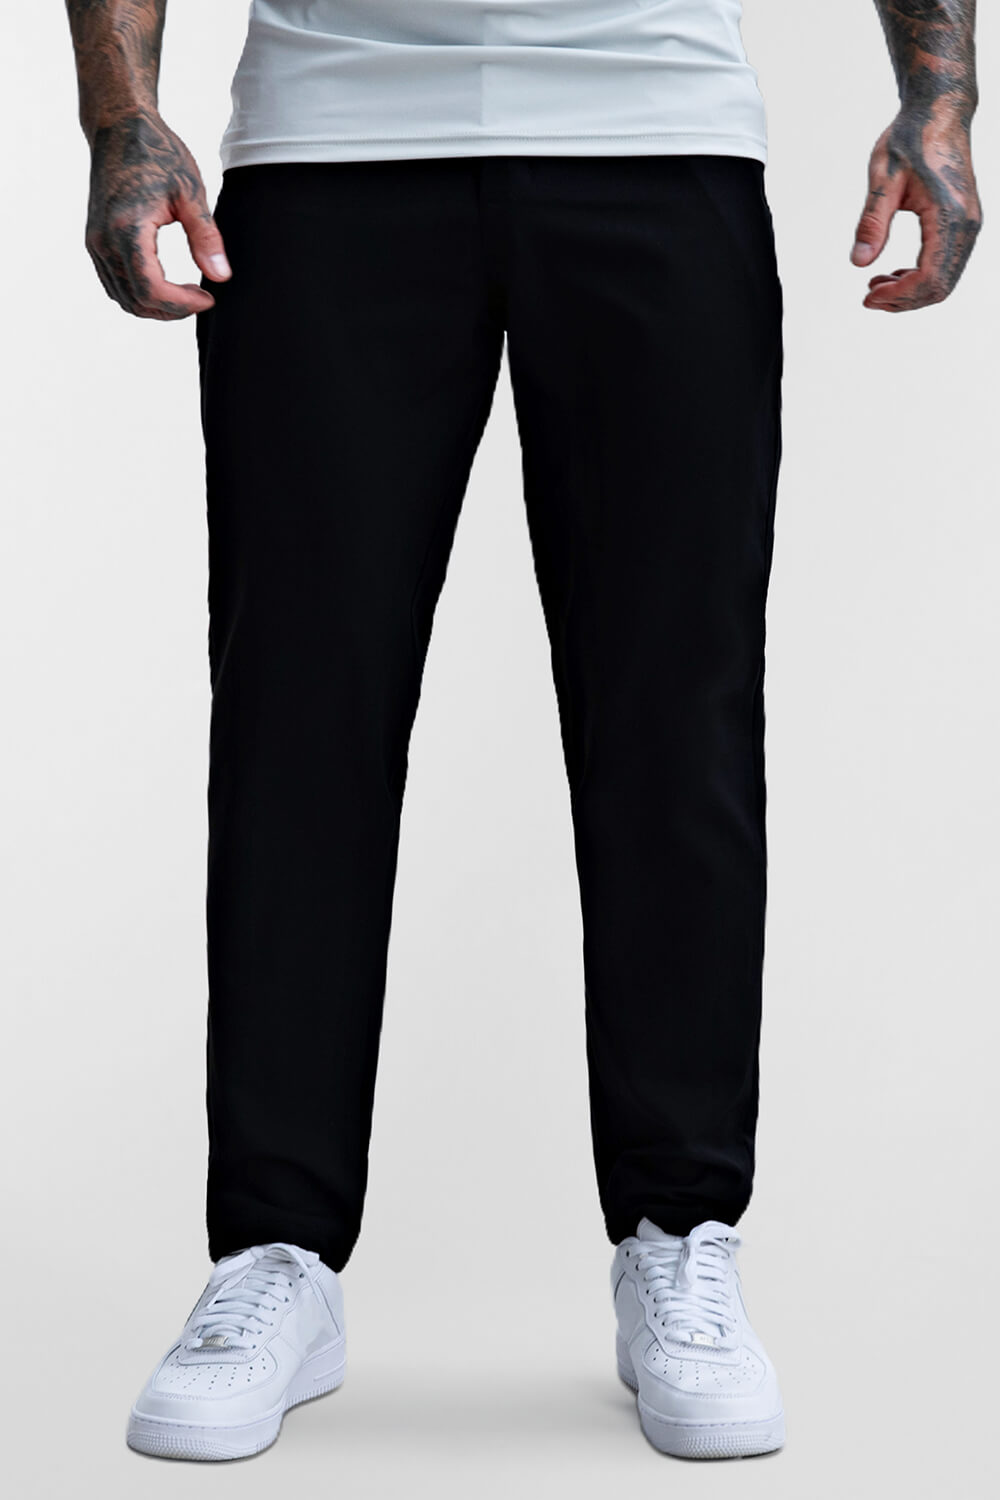 Men's Relaxed Fit Chino Pant - Black